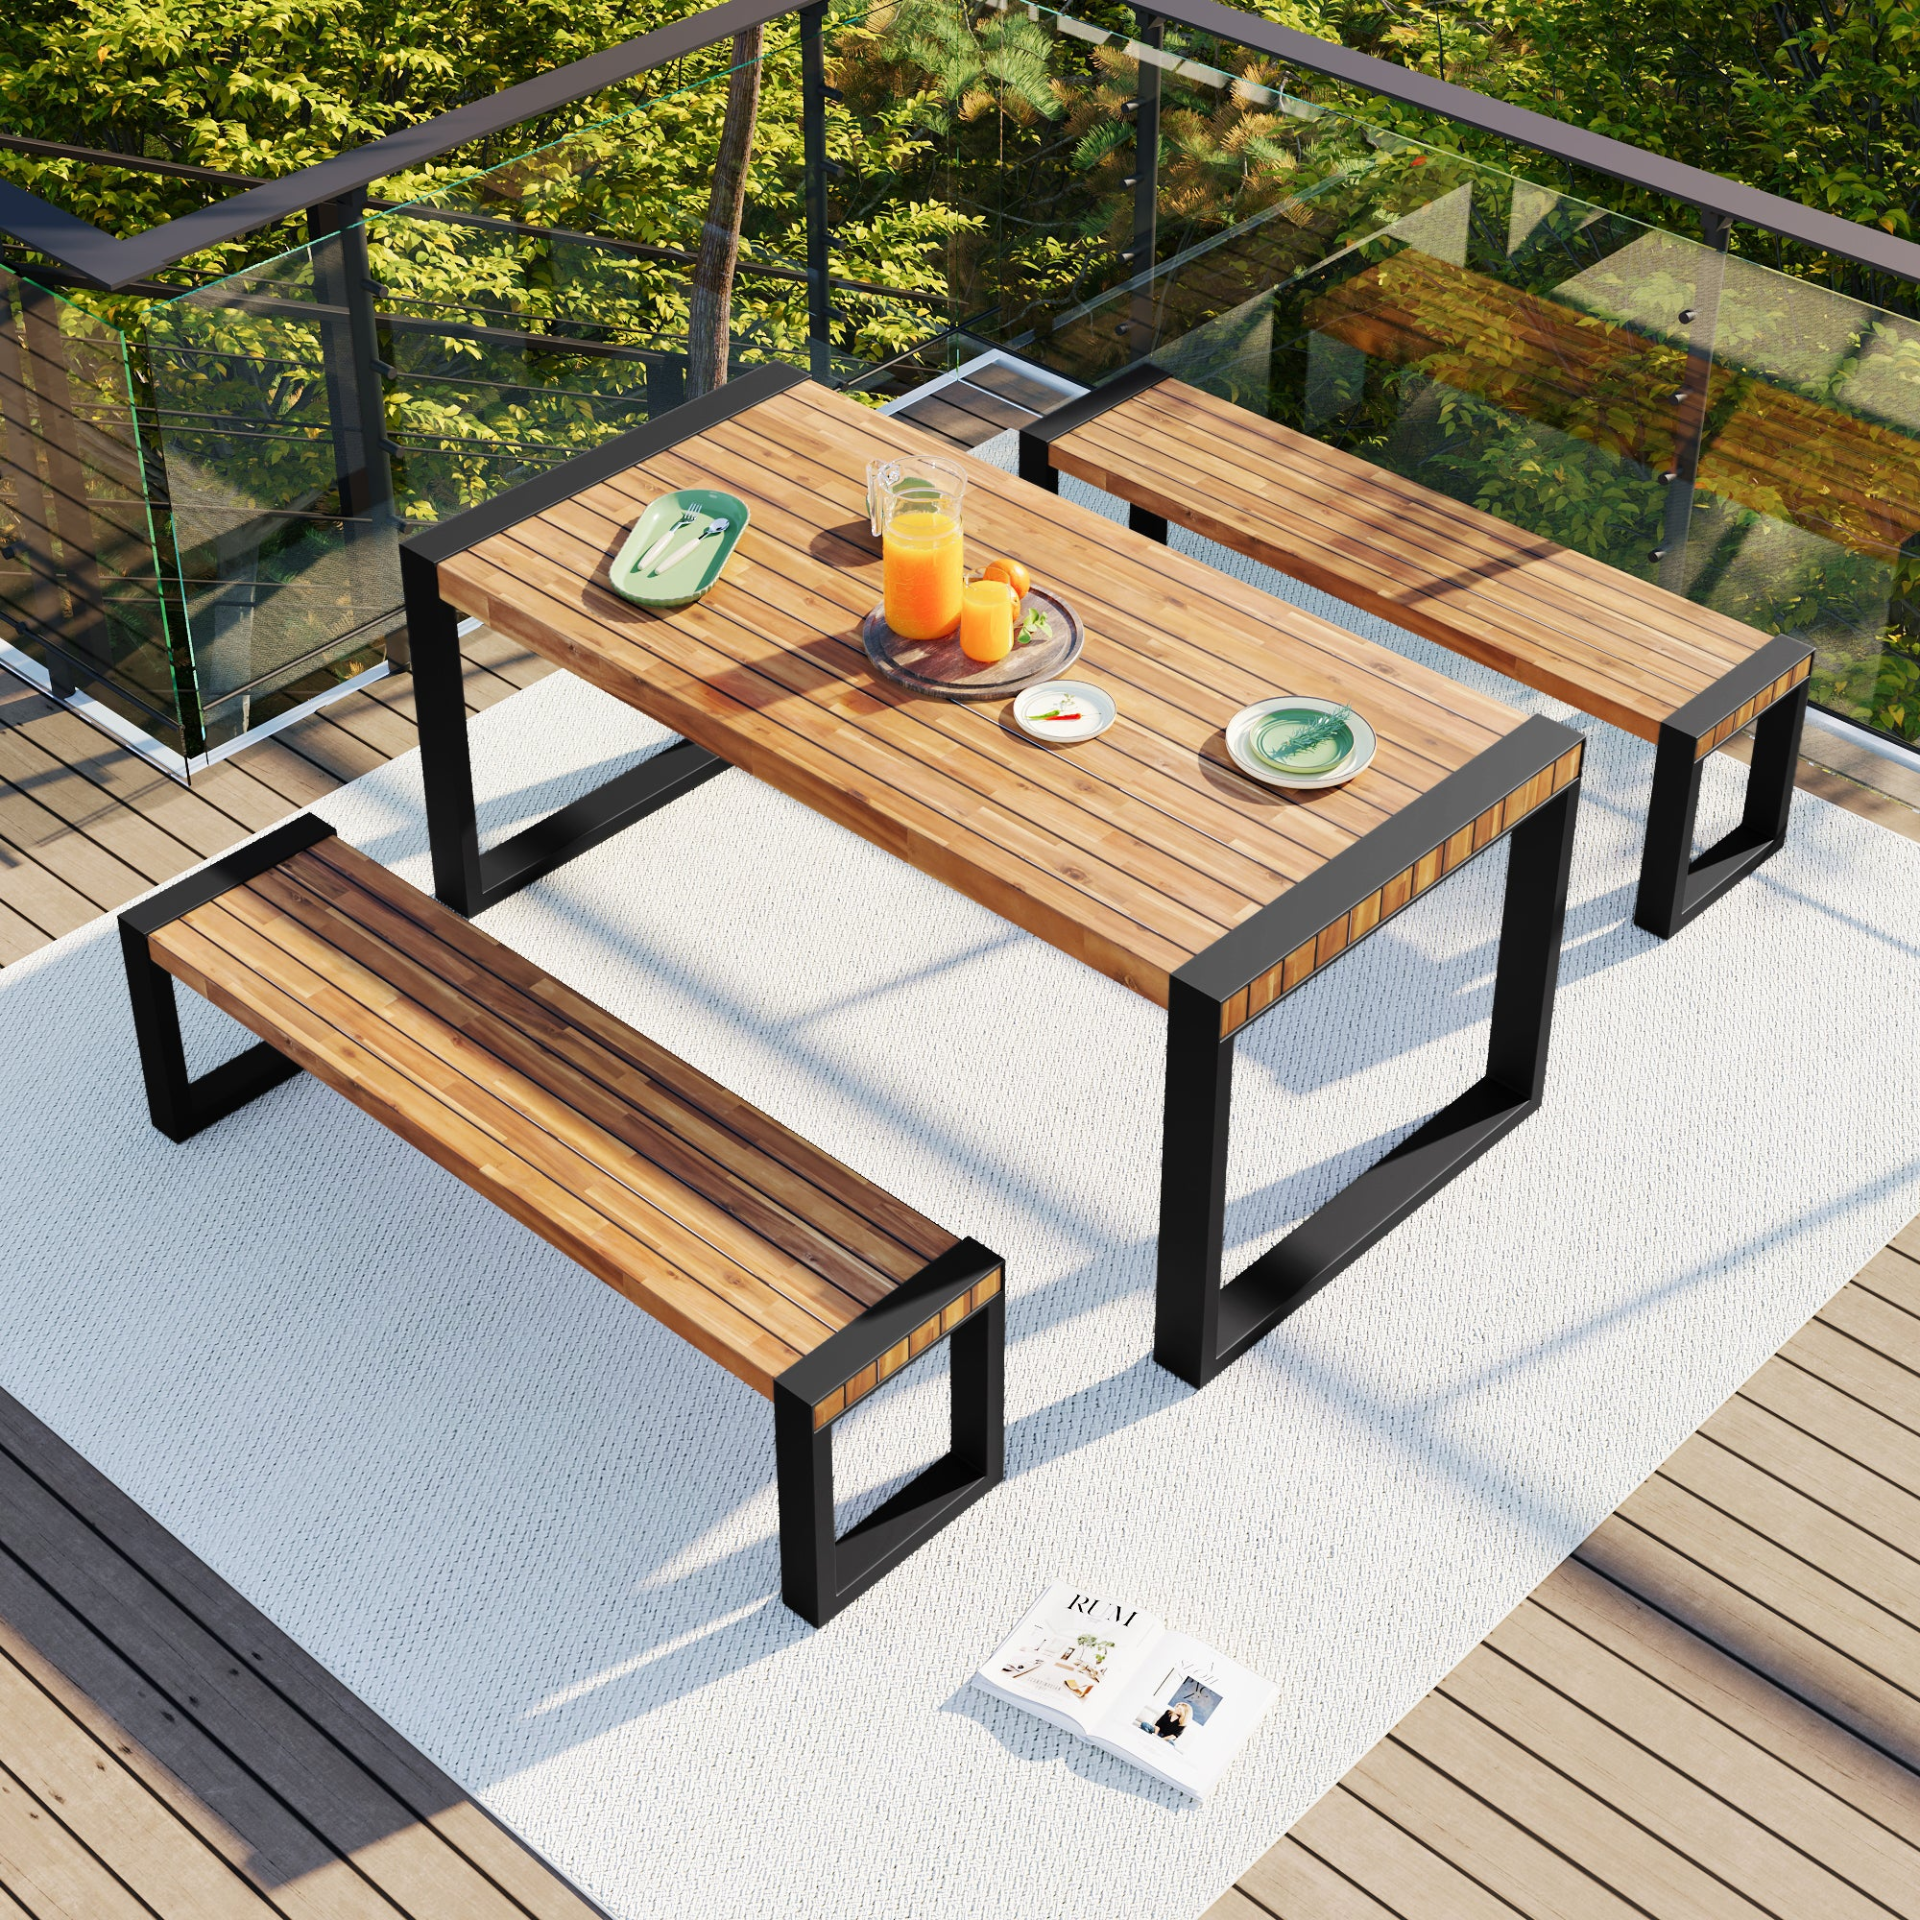 3-pieces Outdoor Dining Table With 2 Benches, Patio Dining Set With Unique Top Texture, Acacia Wood Top & Steel Frame, All Weather Use, For Outdoor & Indoor, Natural